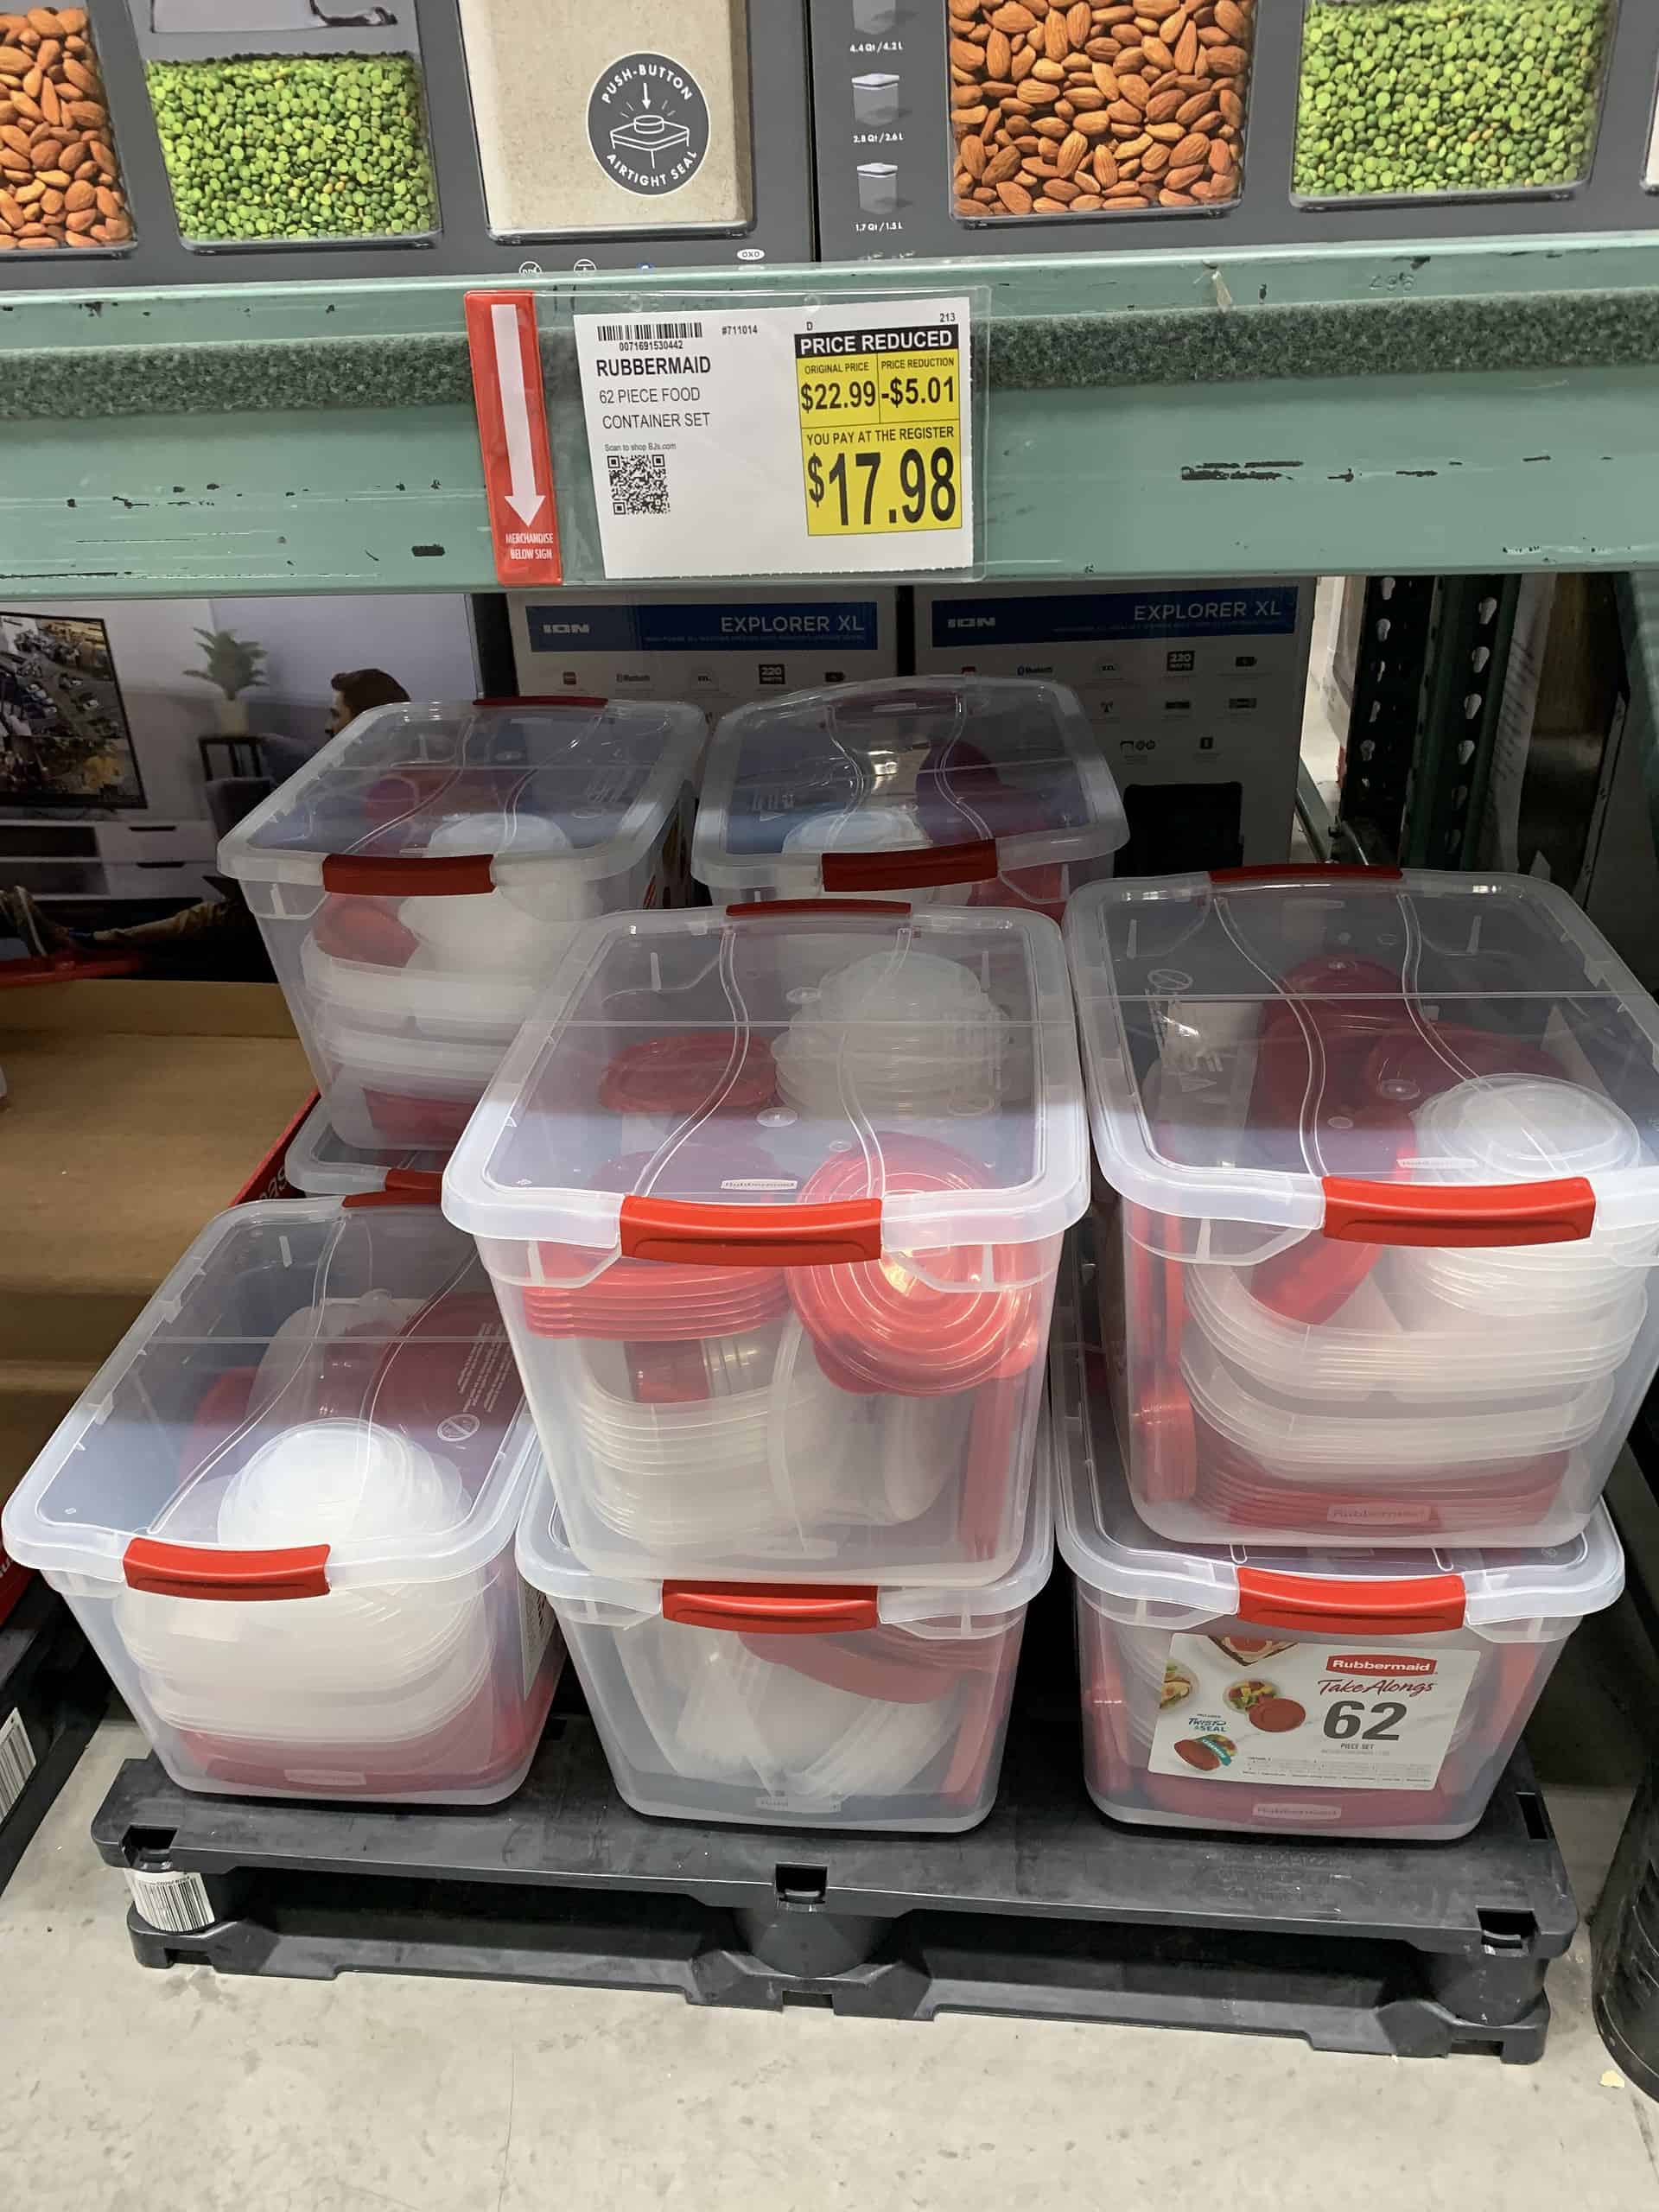 Rubbermaid TakeAlongs 62-Pc. Food Container Set $17.98